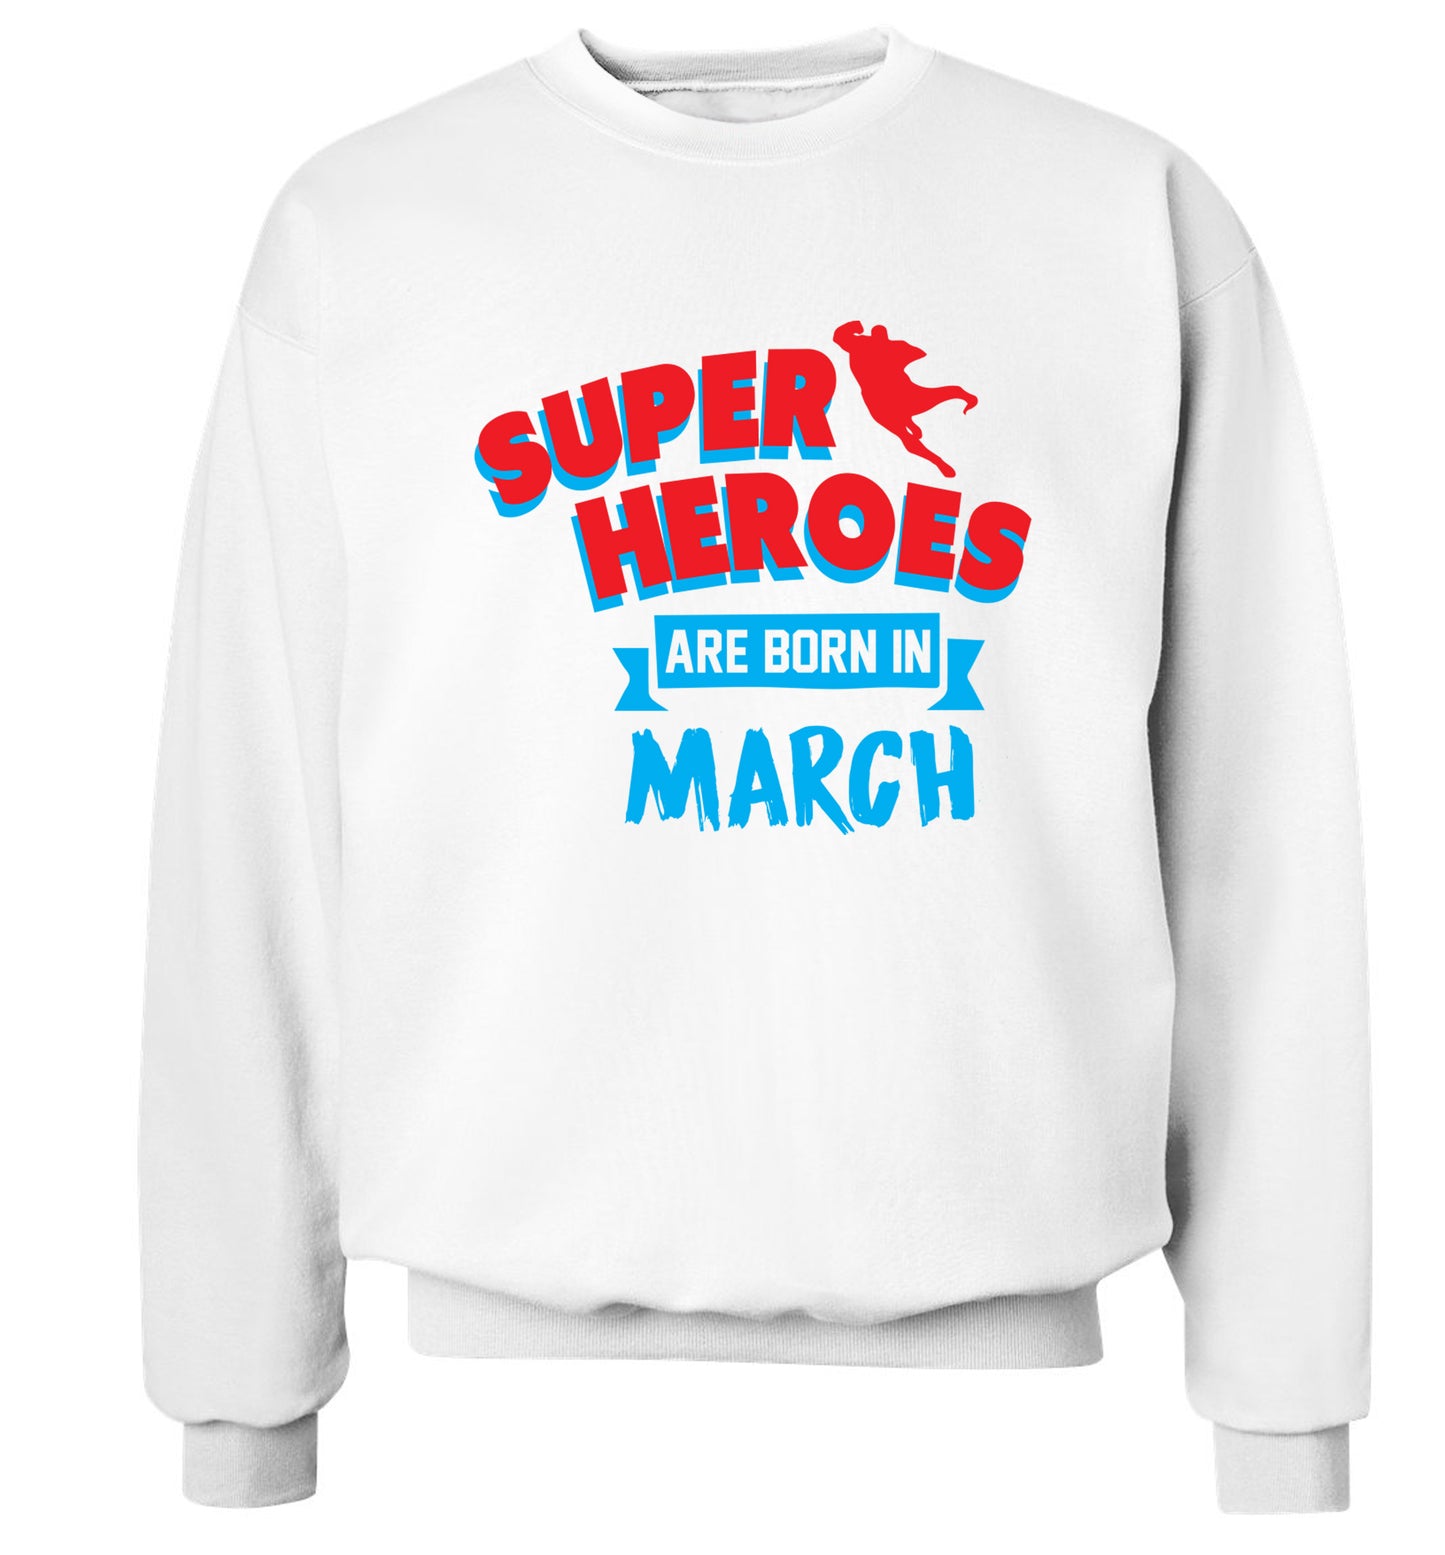 Superheros are born in March Adult's unisex white Sweater 2XL